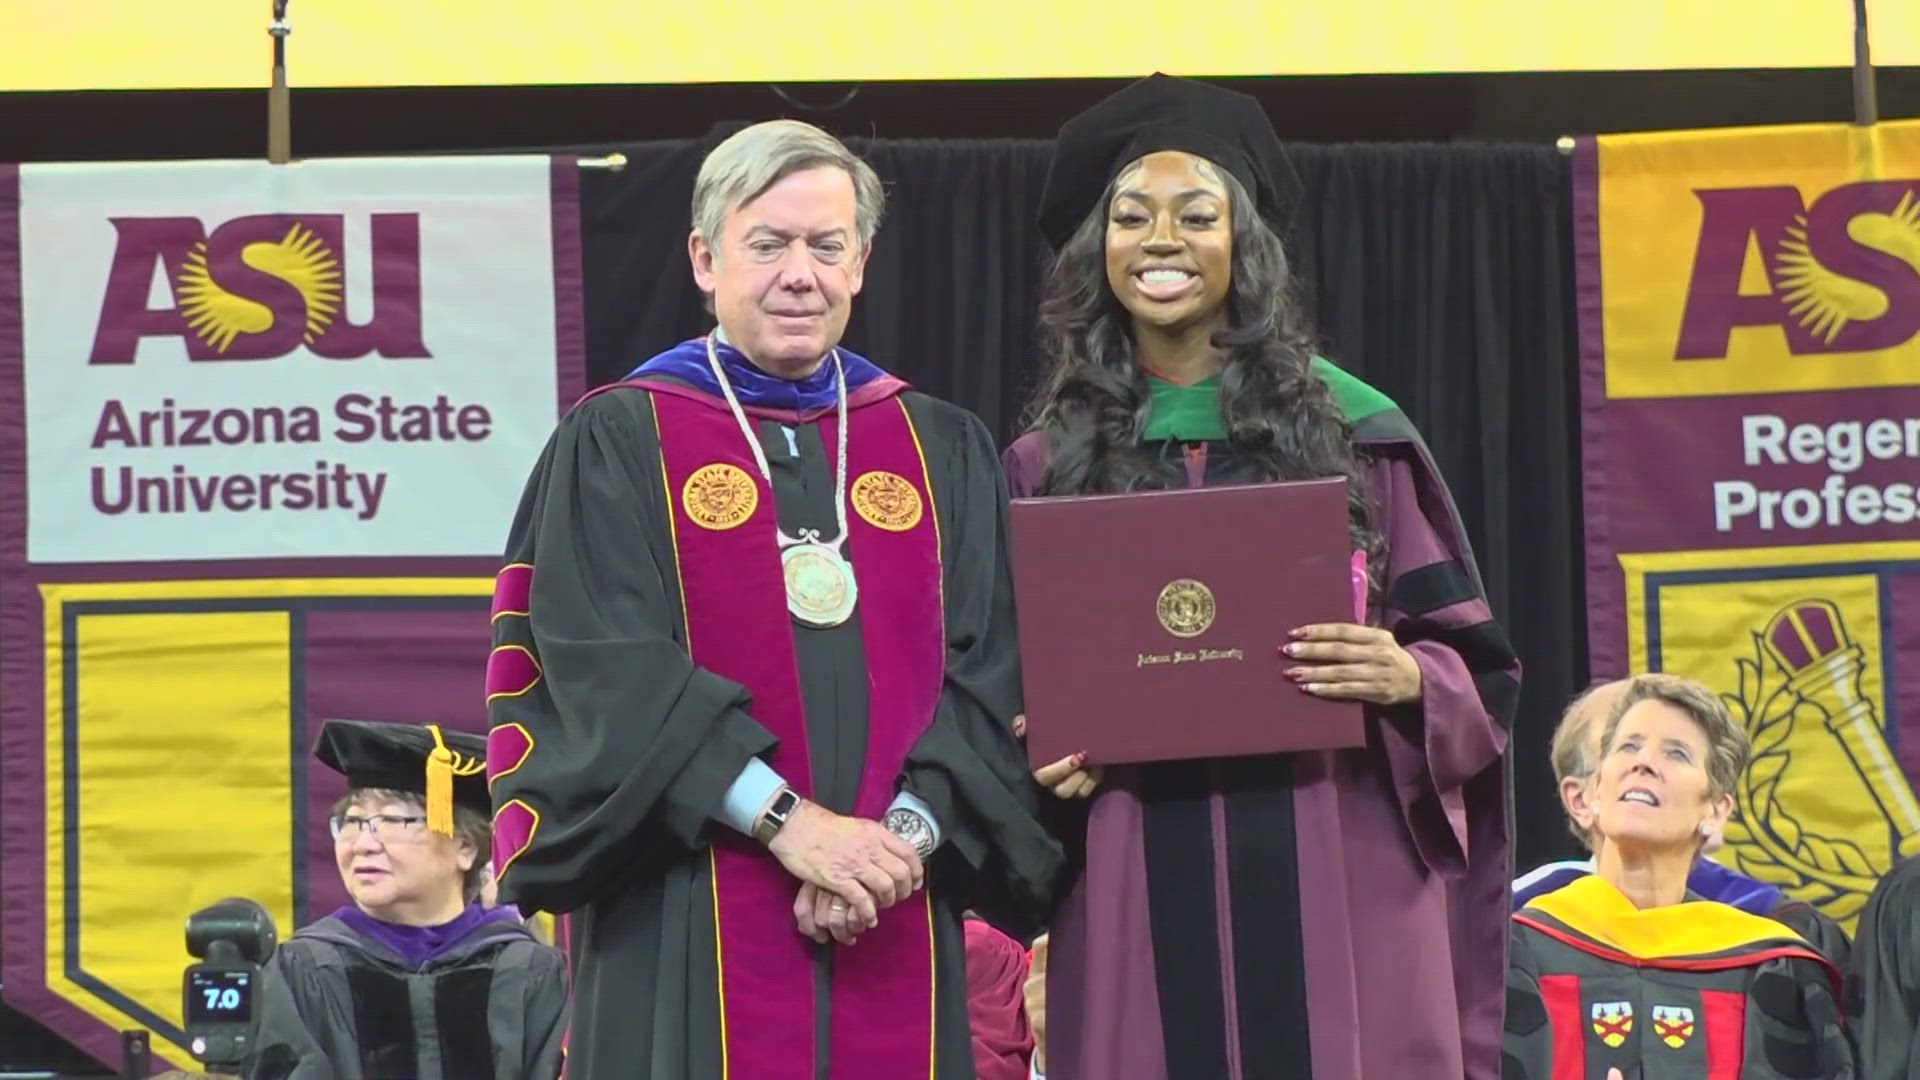 Dorothy Jean Tillman isn't your normal 18-year-old. Instead of entering college, she just graduated with a doctorate.